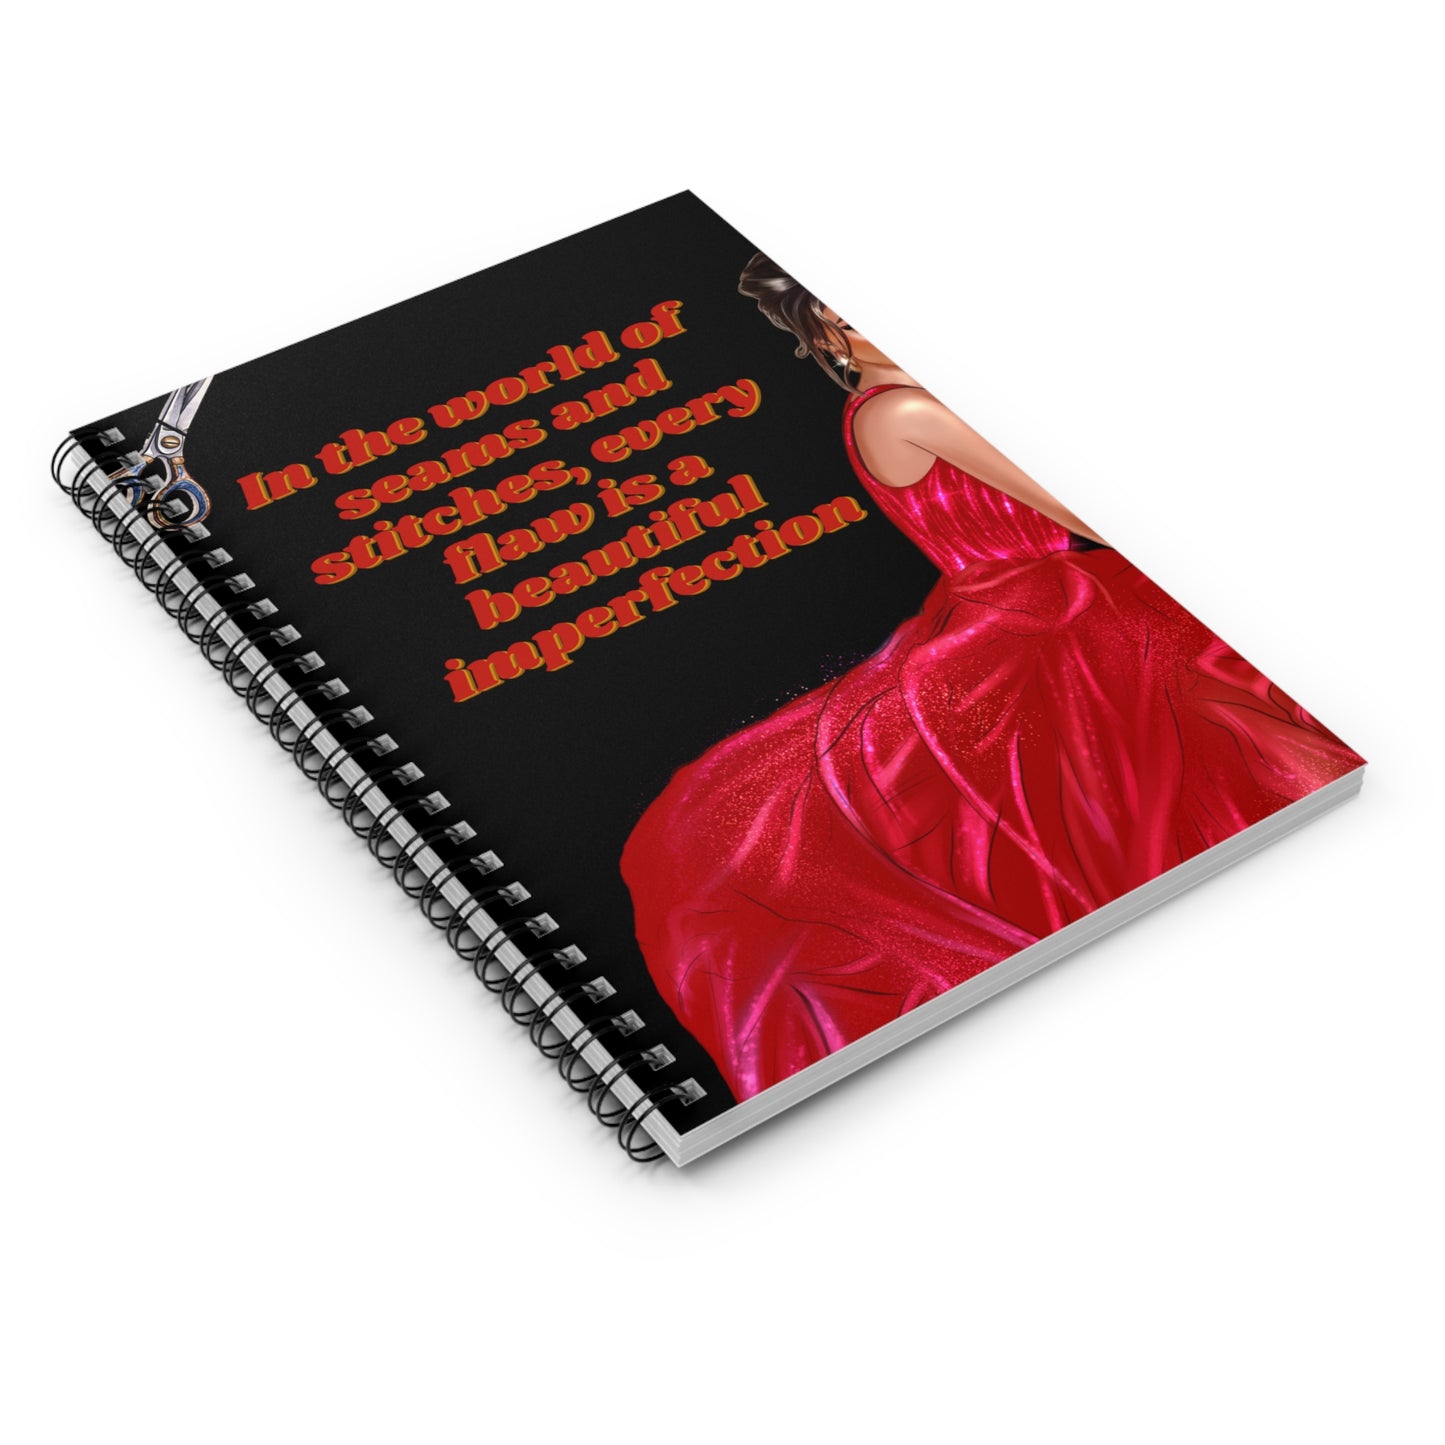 Perfectly Imperfect: Spiral Notebook - Log Books - Journals - Diaries - and More Custom Printed by TheGlassyLass